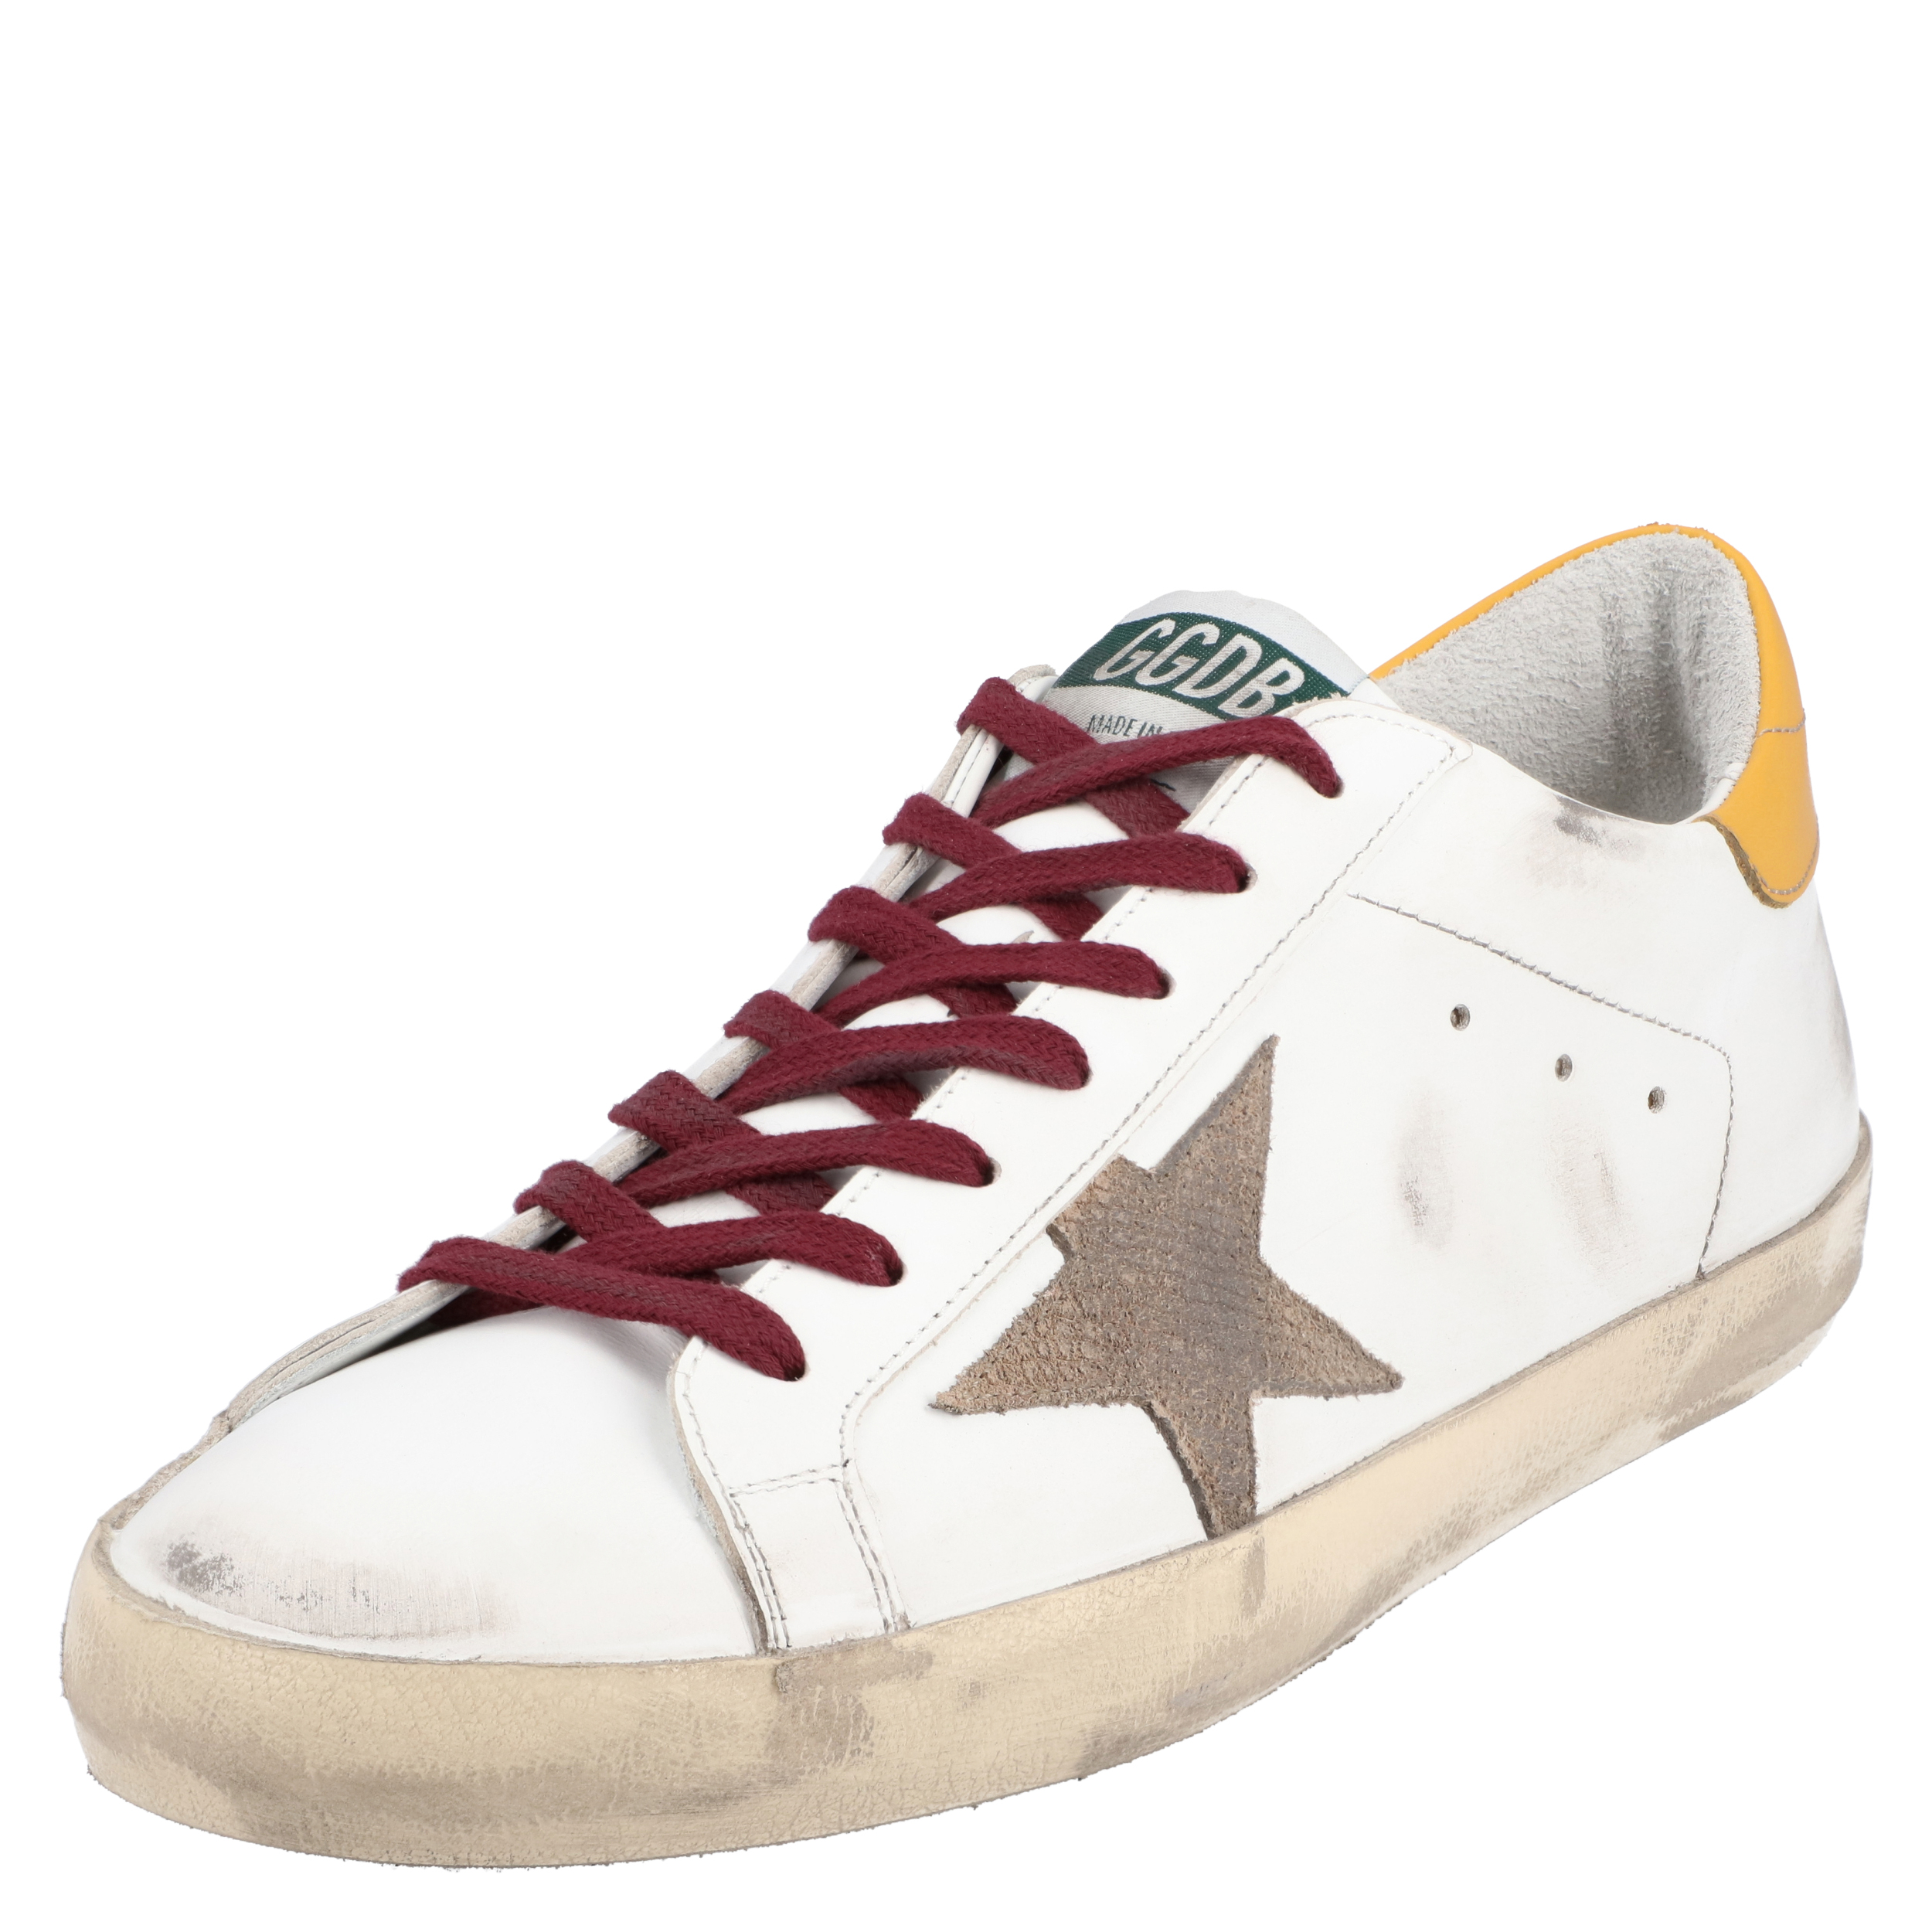 Golden Goose White/Yellow Leather Superstar Sneakers Size EU 45